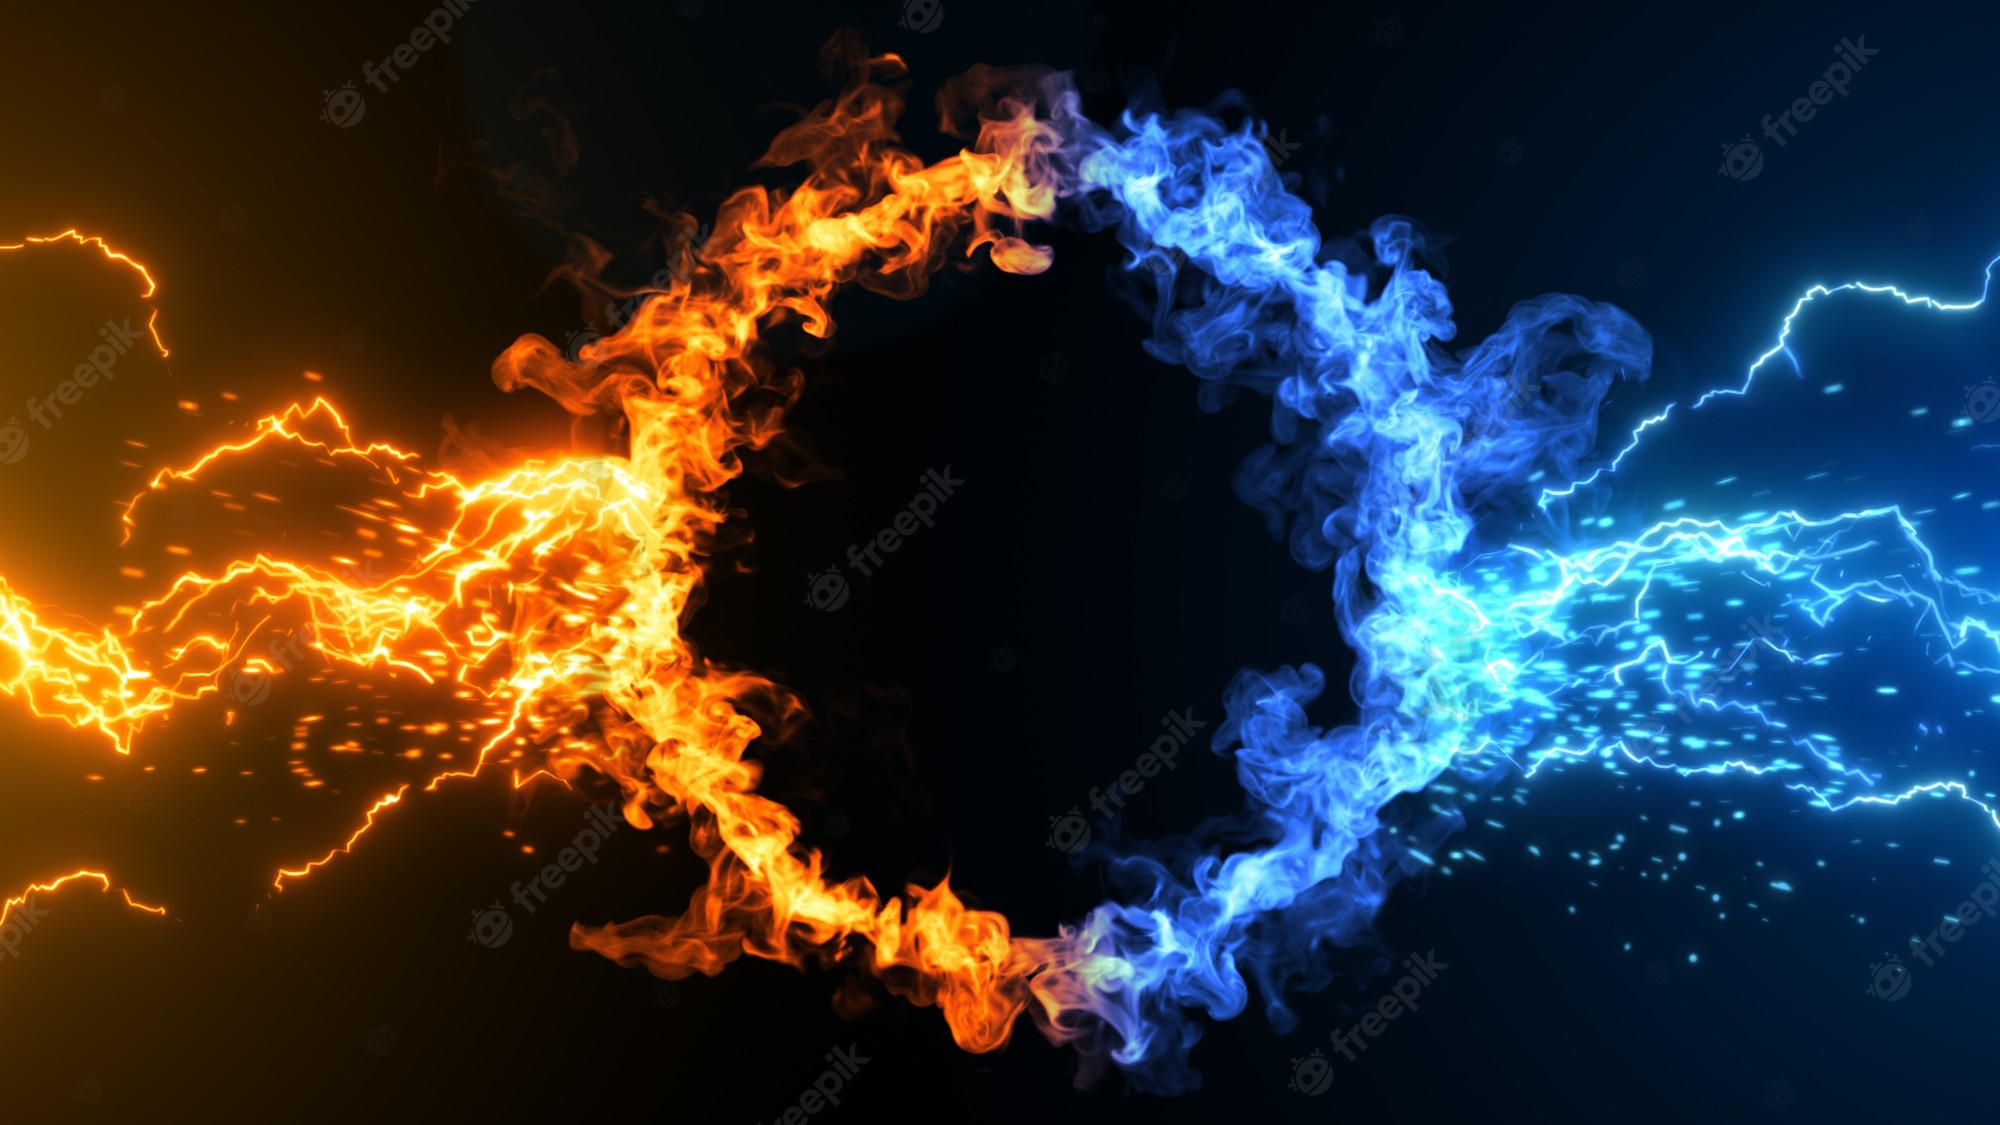 Orange And Blue Fire And Ice Gradient Wallpapers